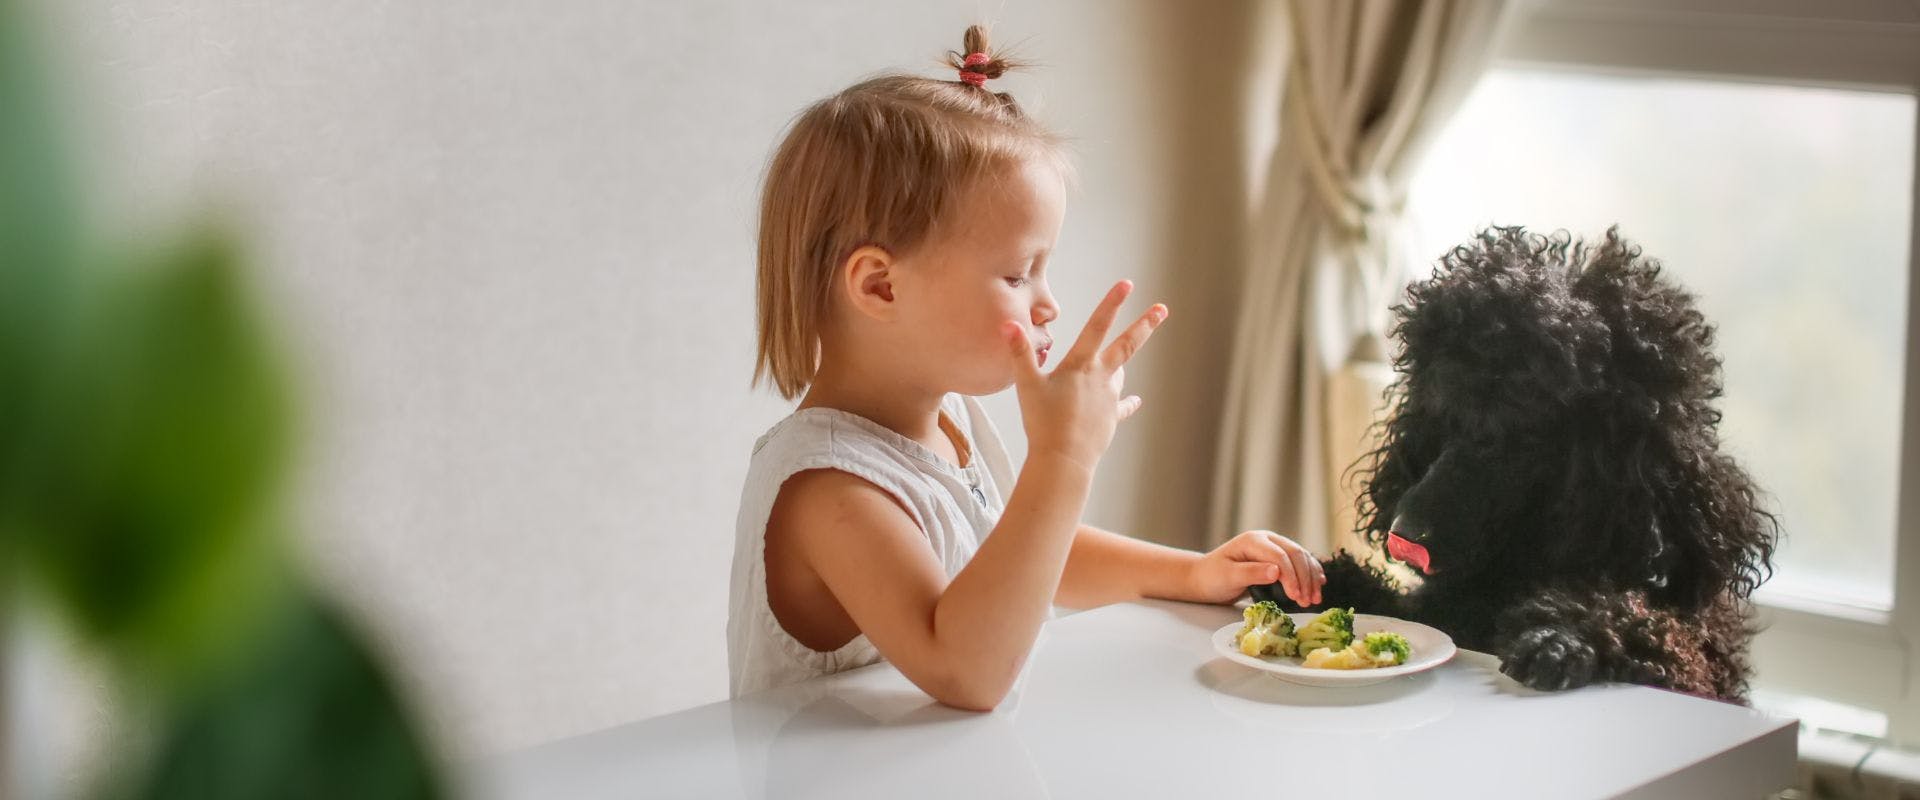 Dog eating broccoli with a young child